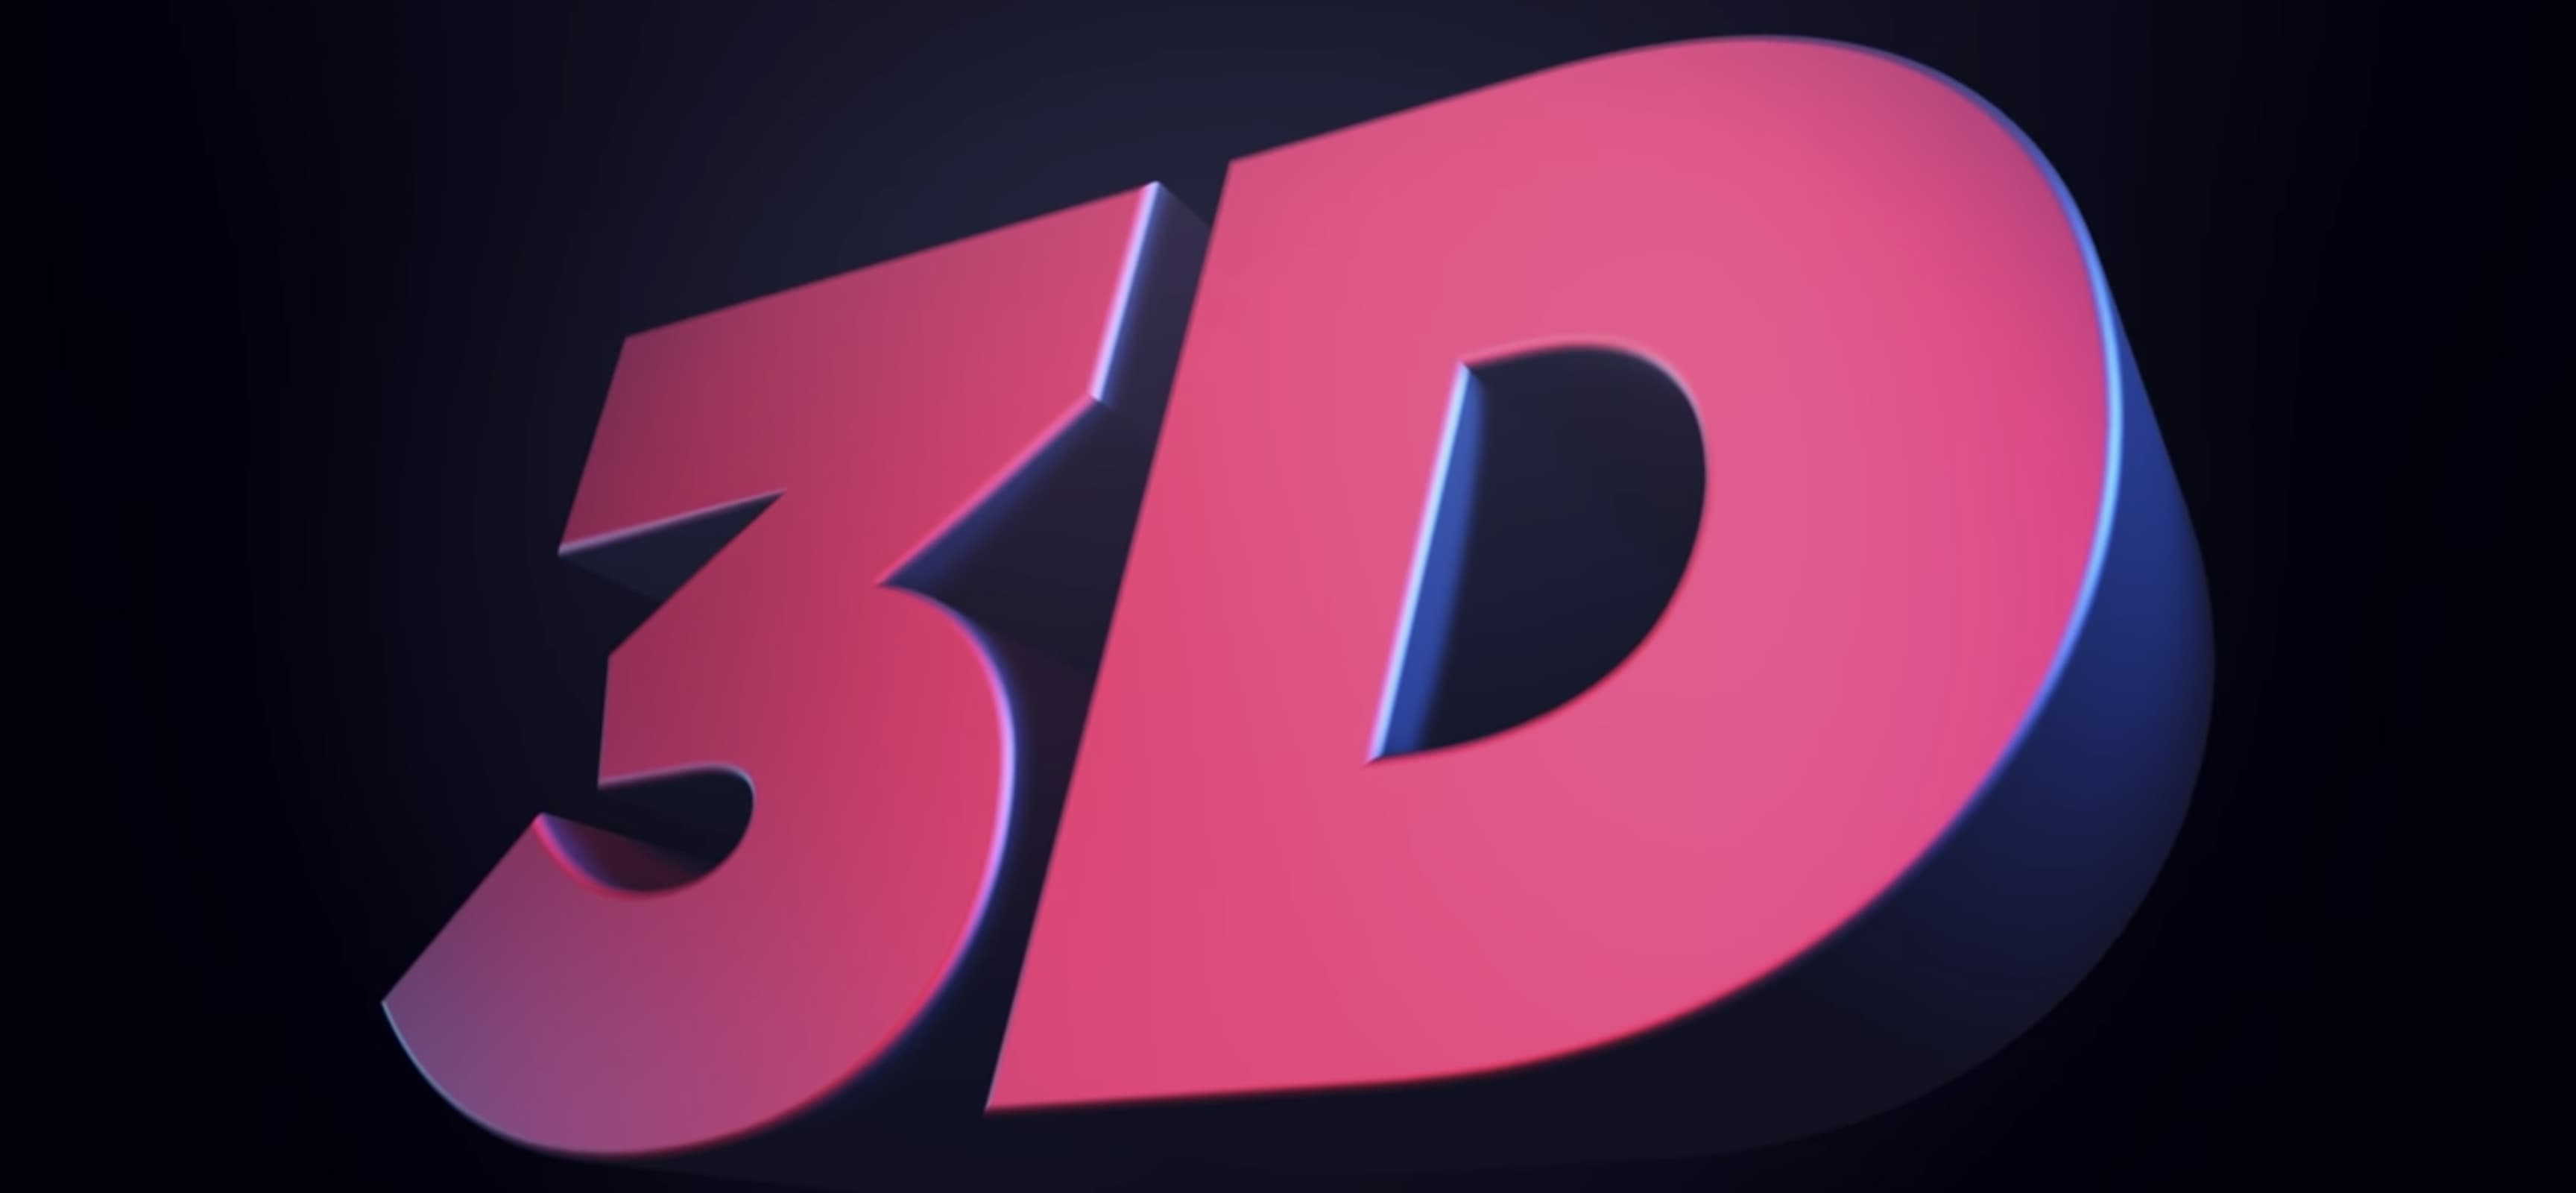 Create 3D Text in After Effects Without Any Plugins